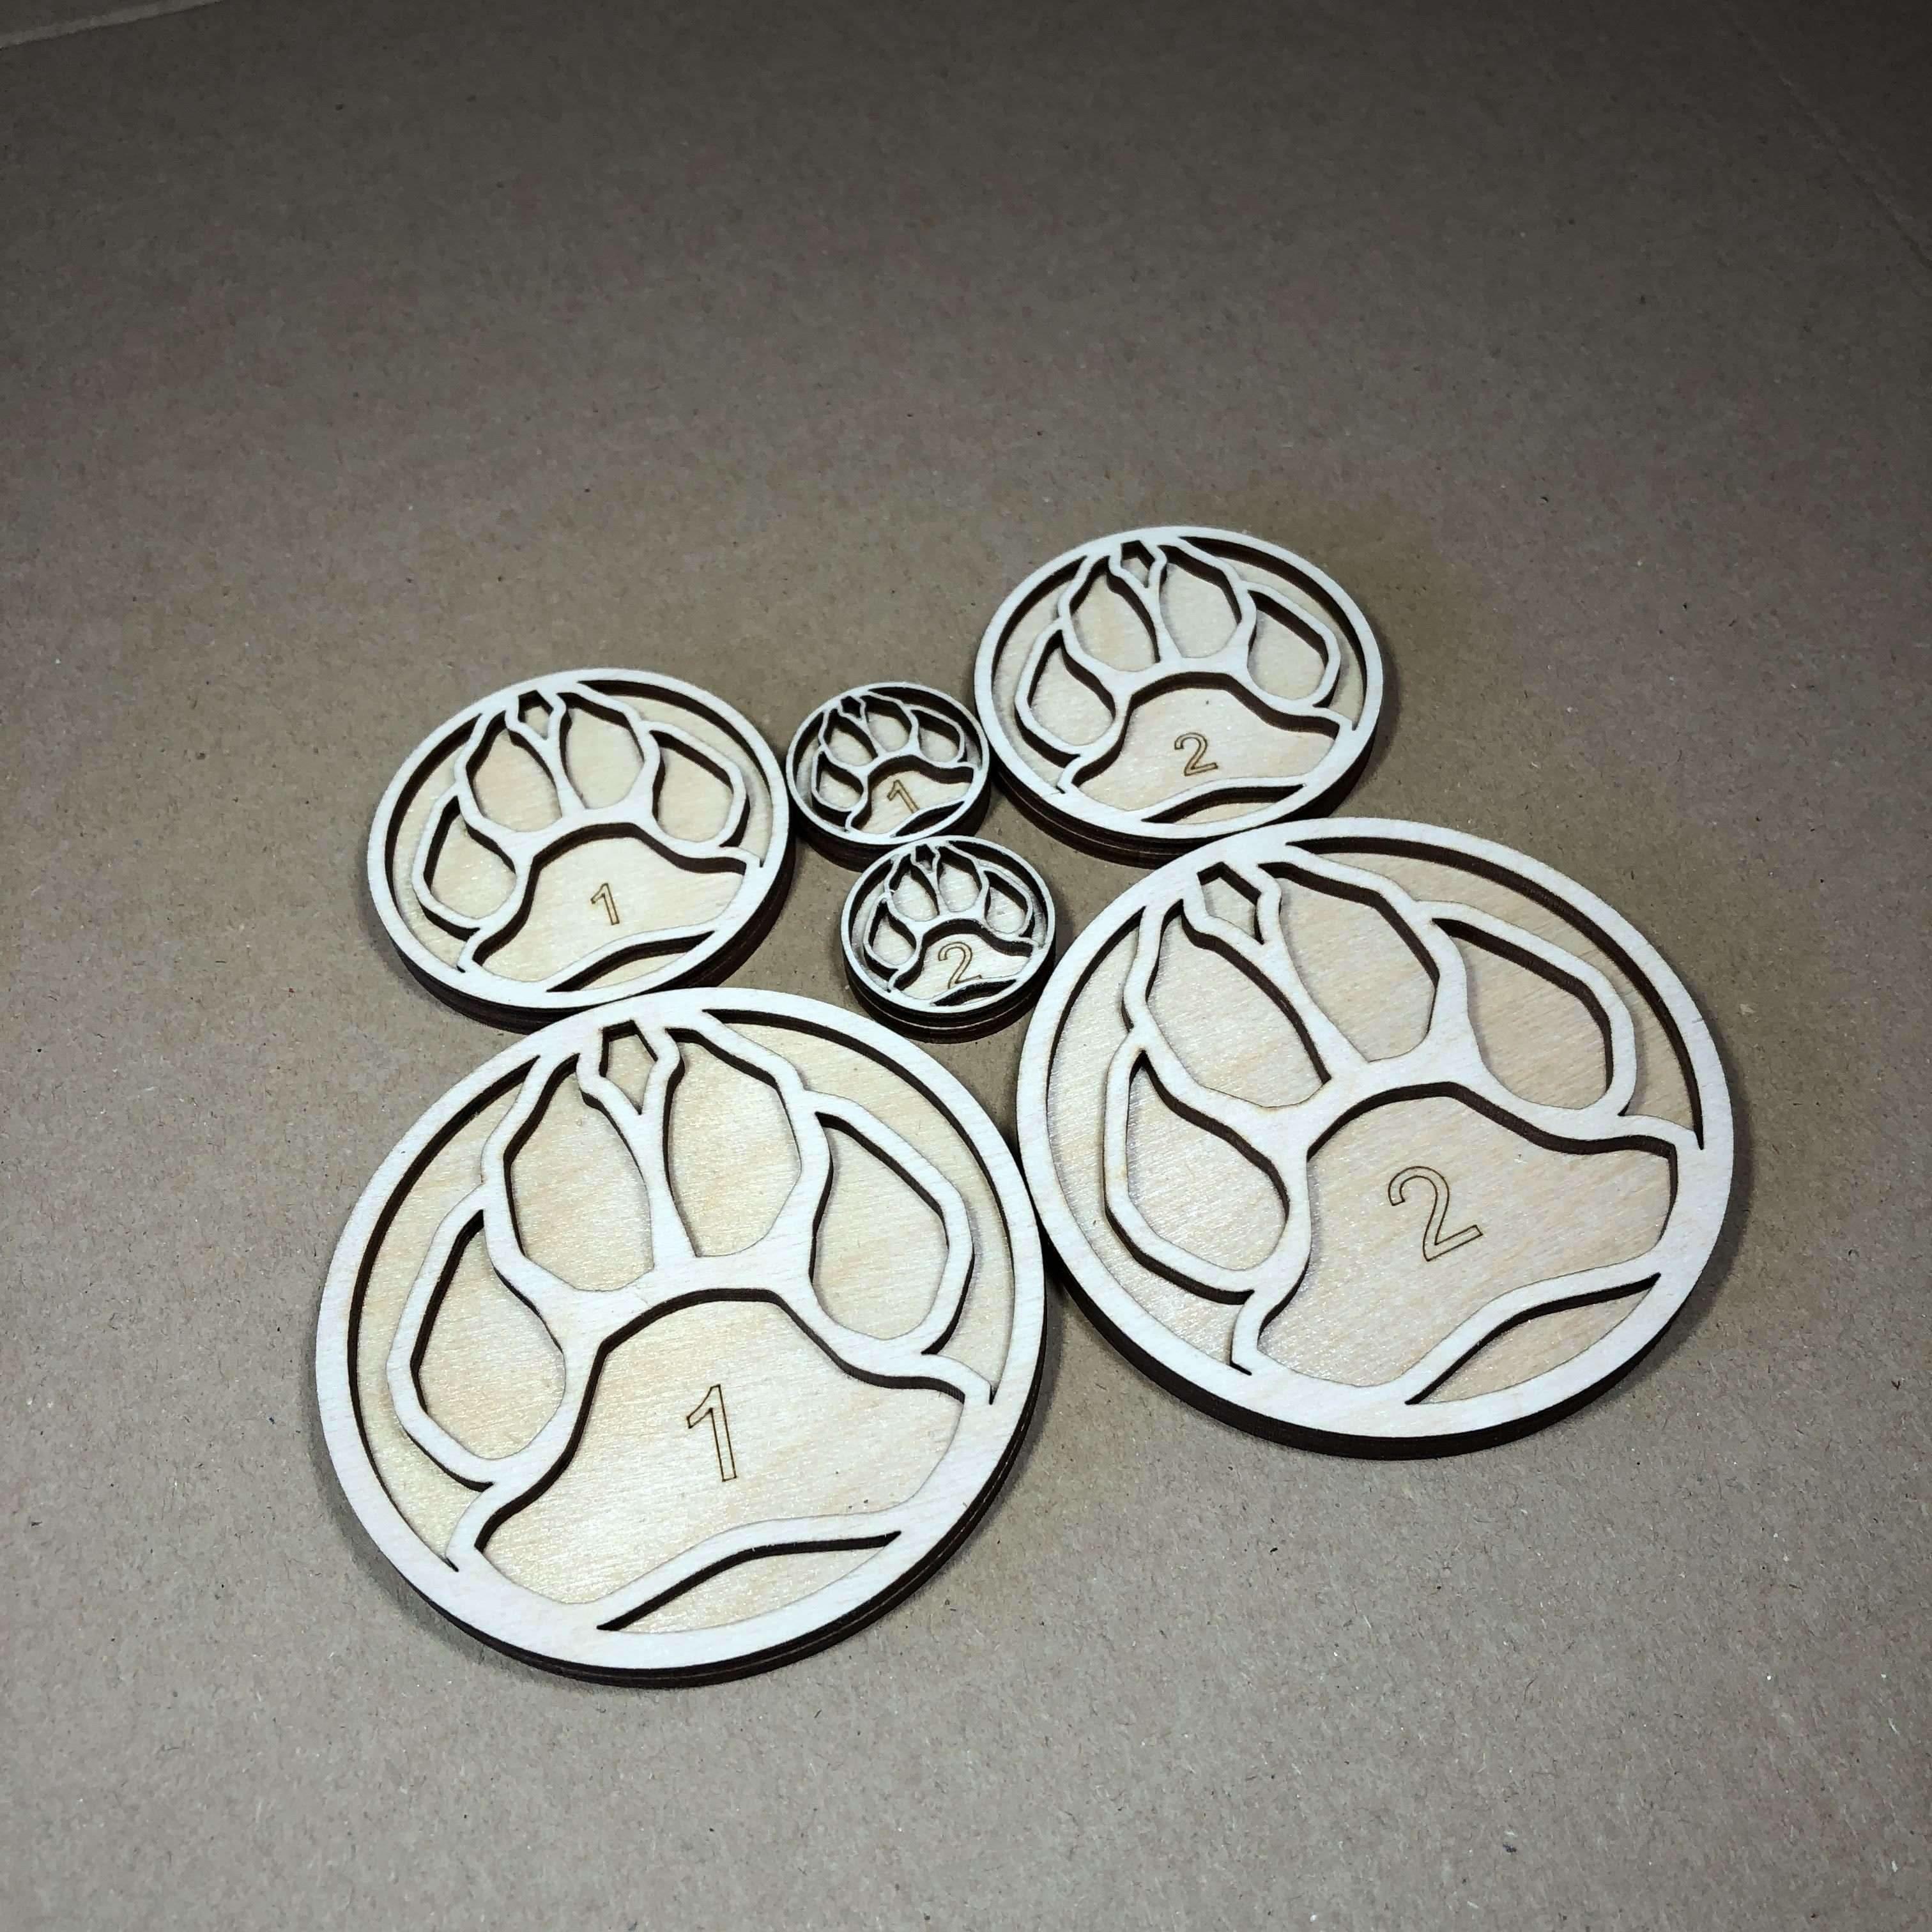 Red Berry Crafts Ltd:Wild shape numbered tabletop gaming tokens - 6 piece set